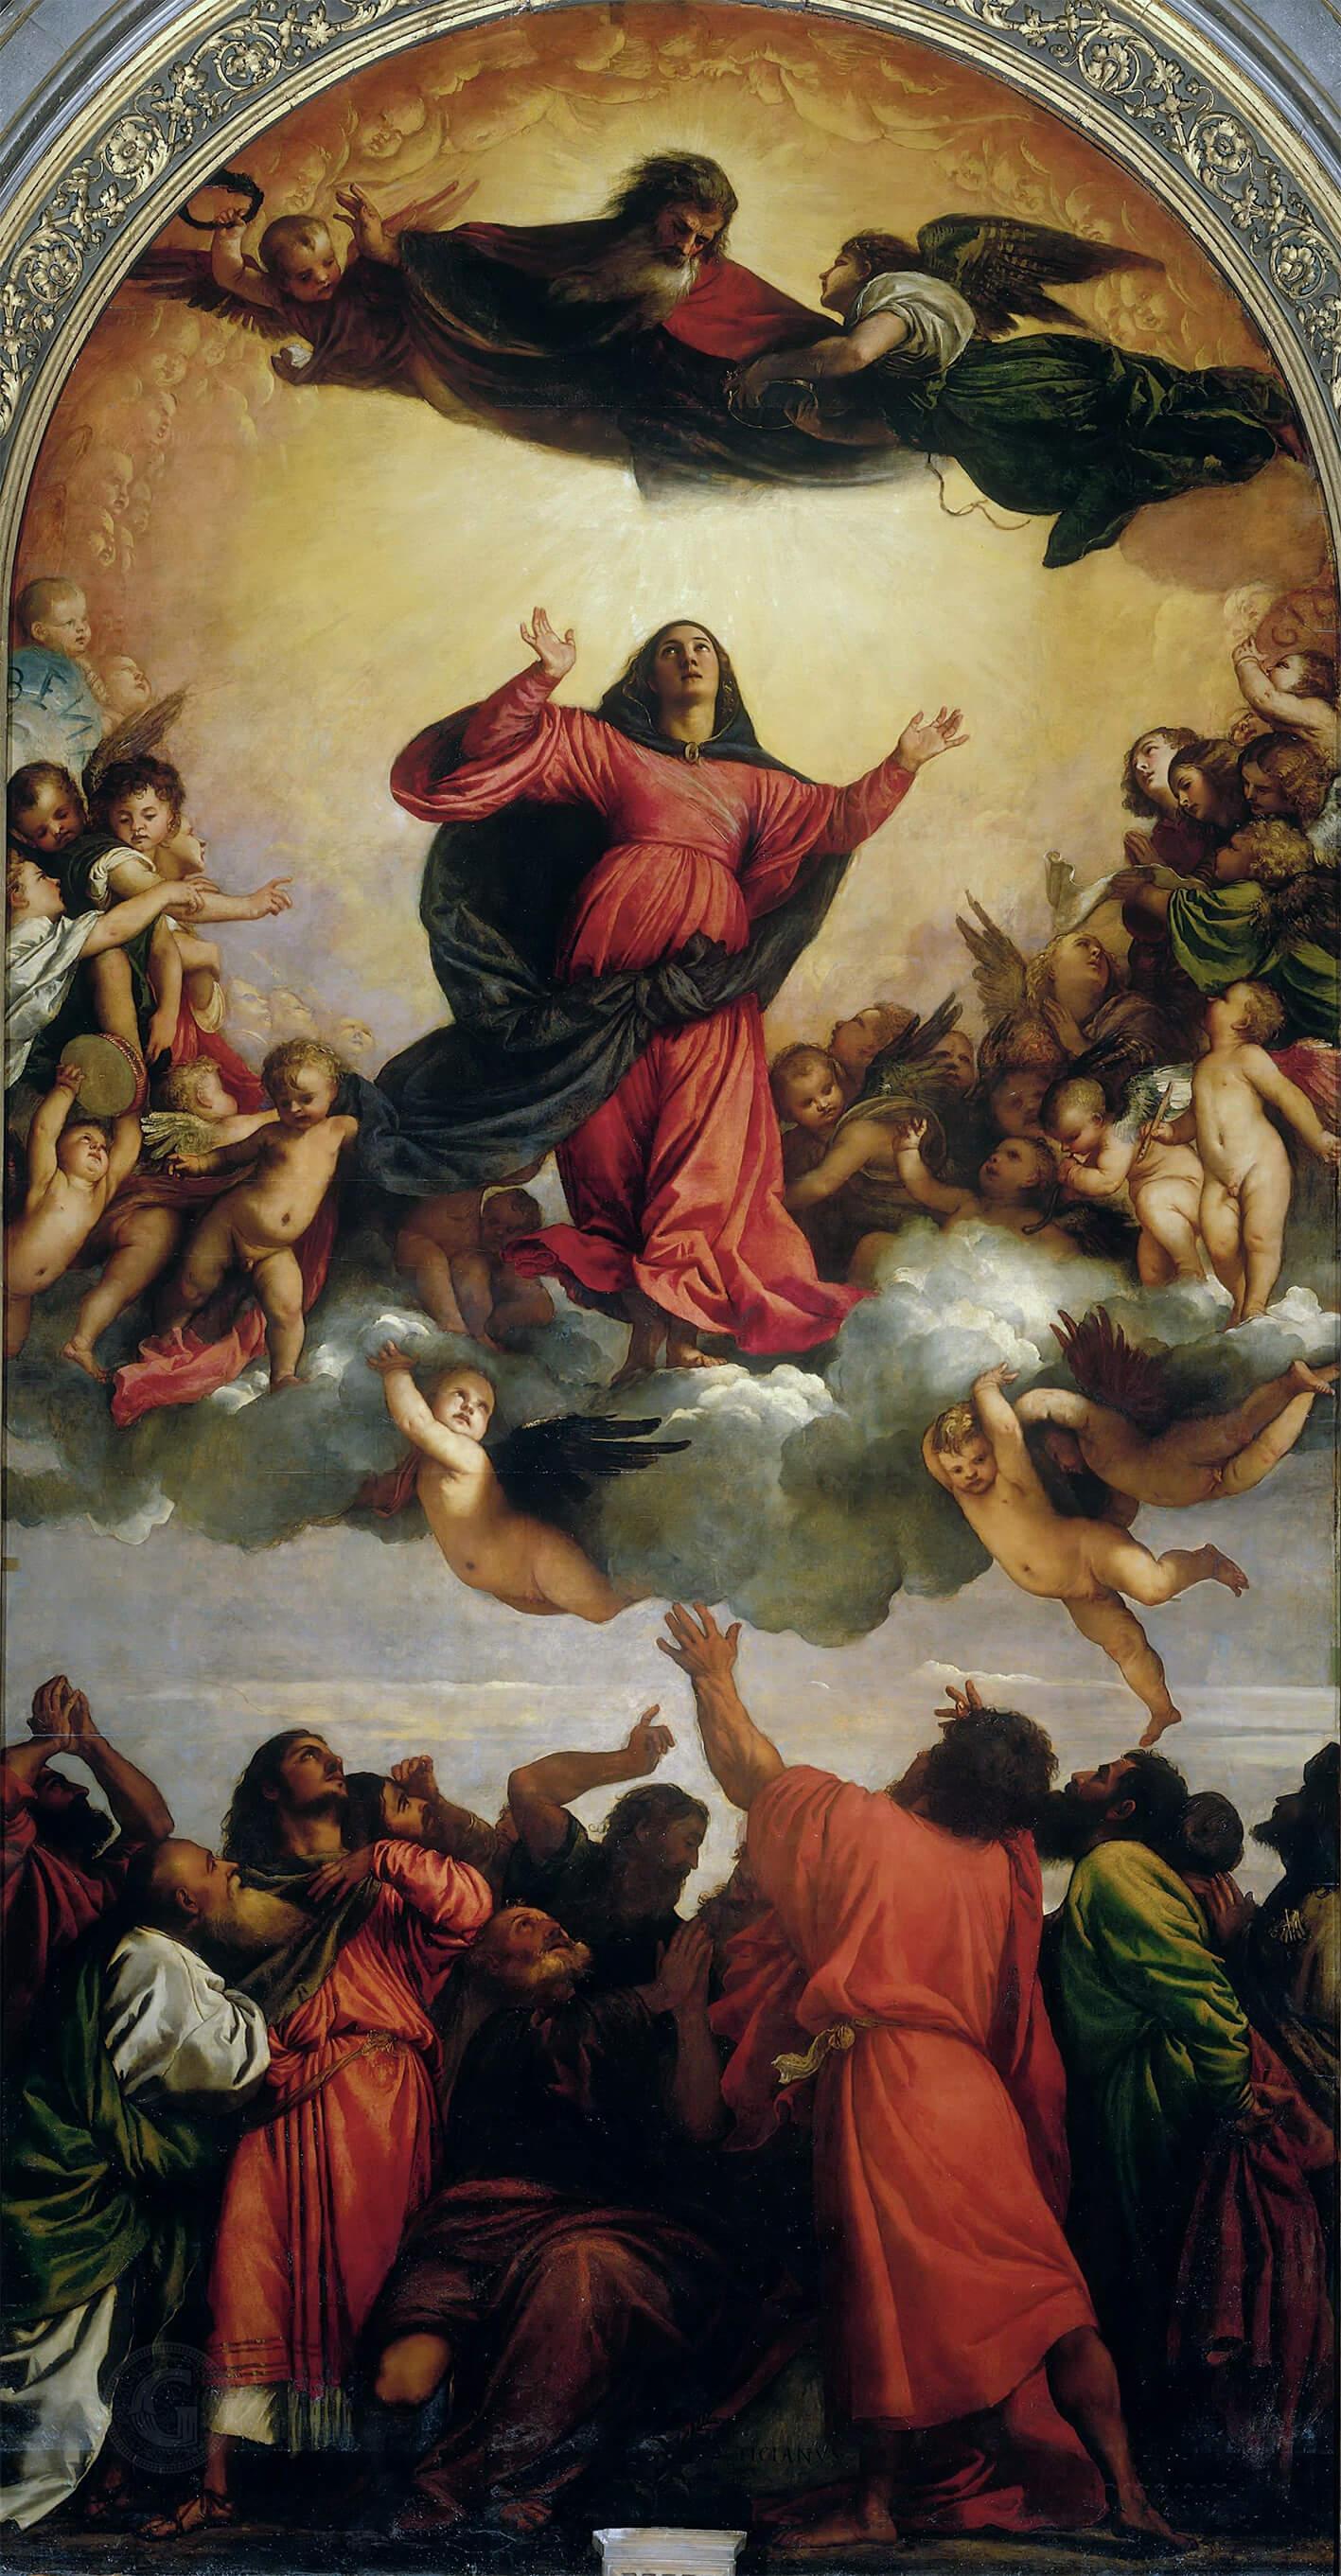 Picture Titian - Assumption of the Virgin Mary 2